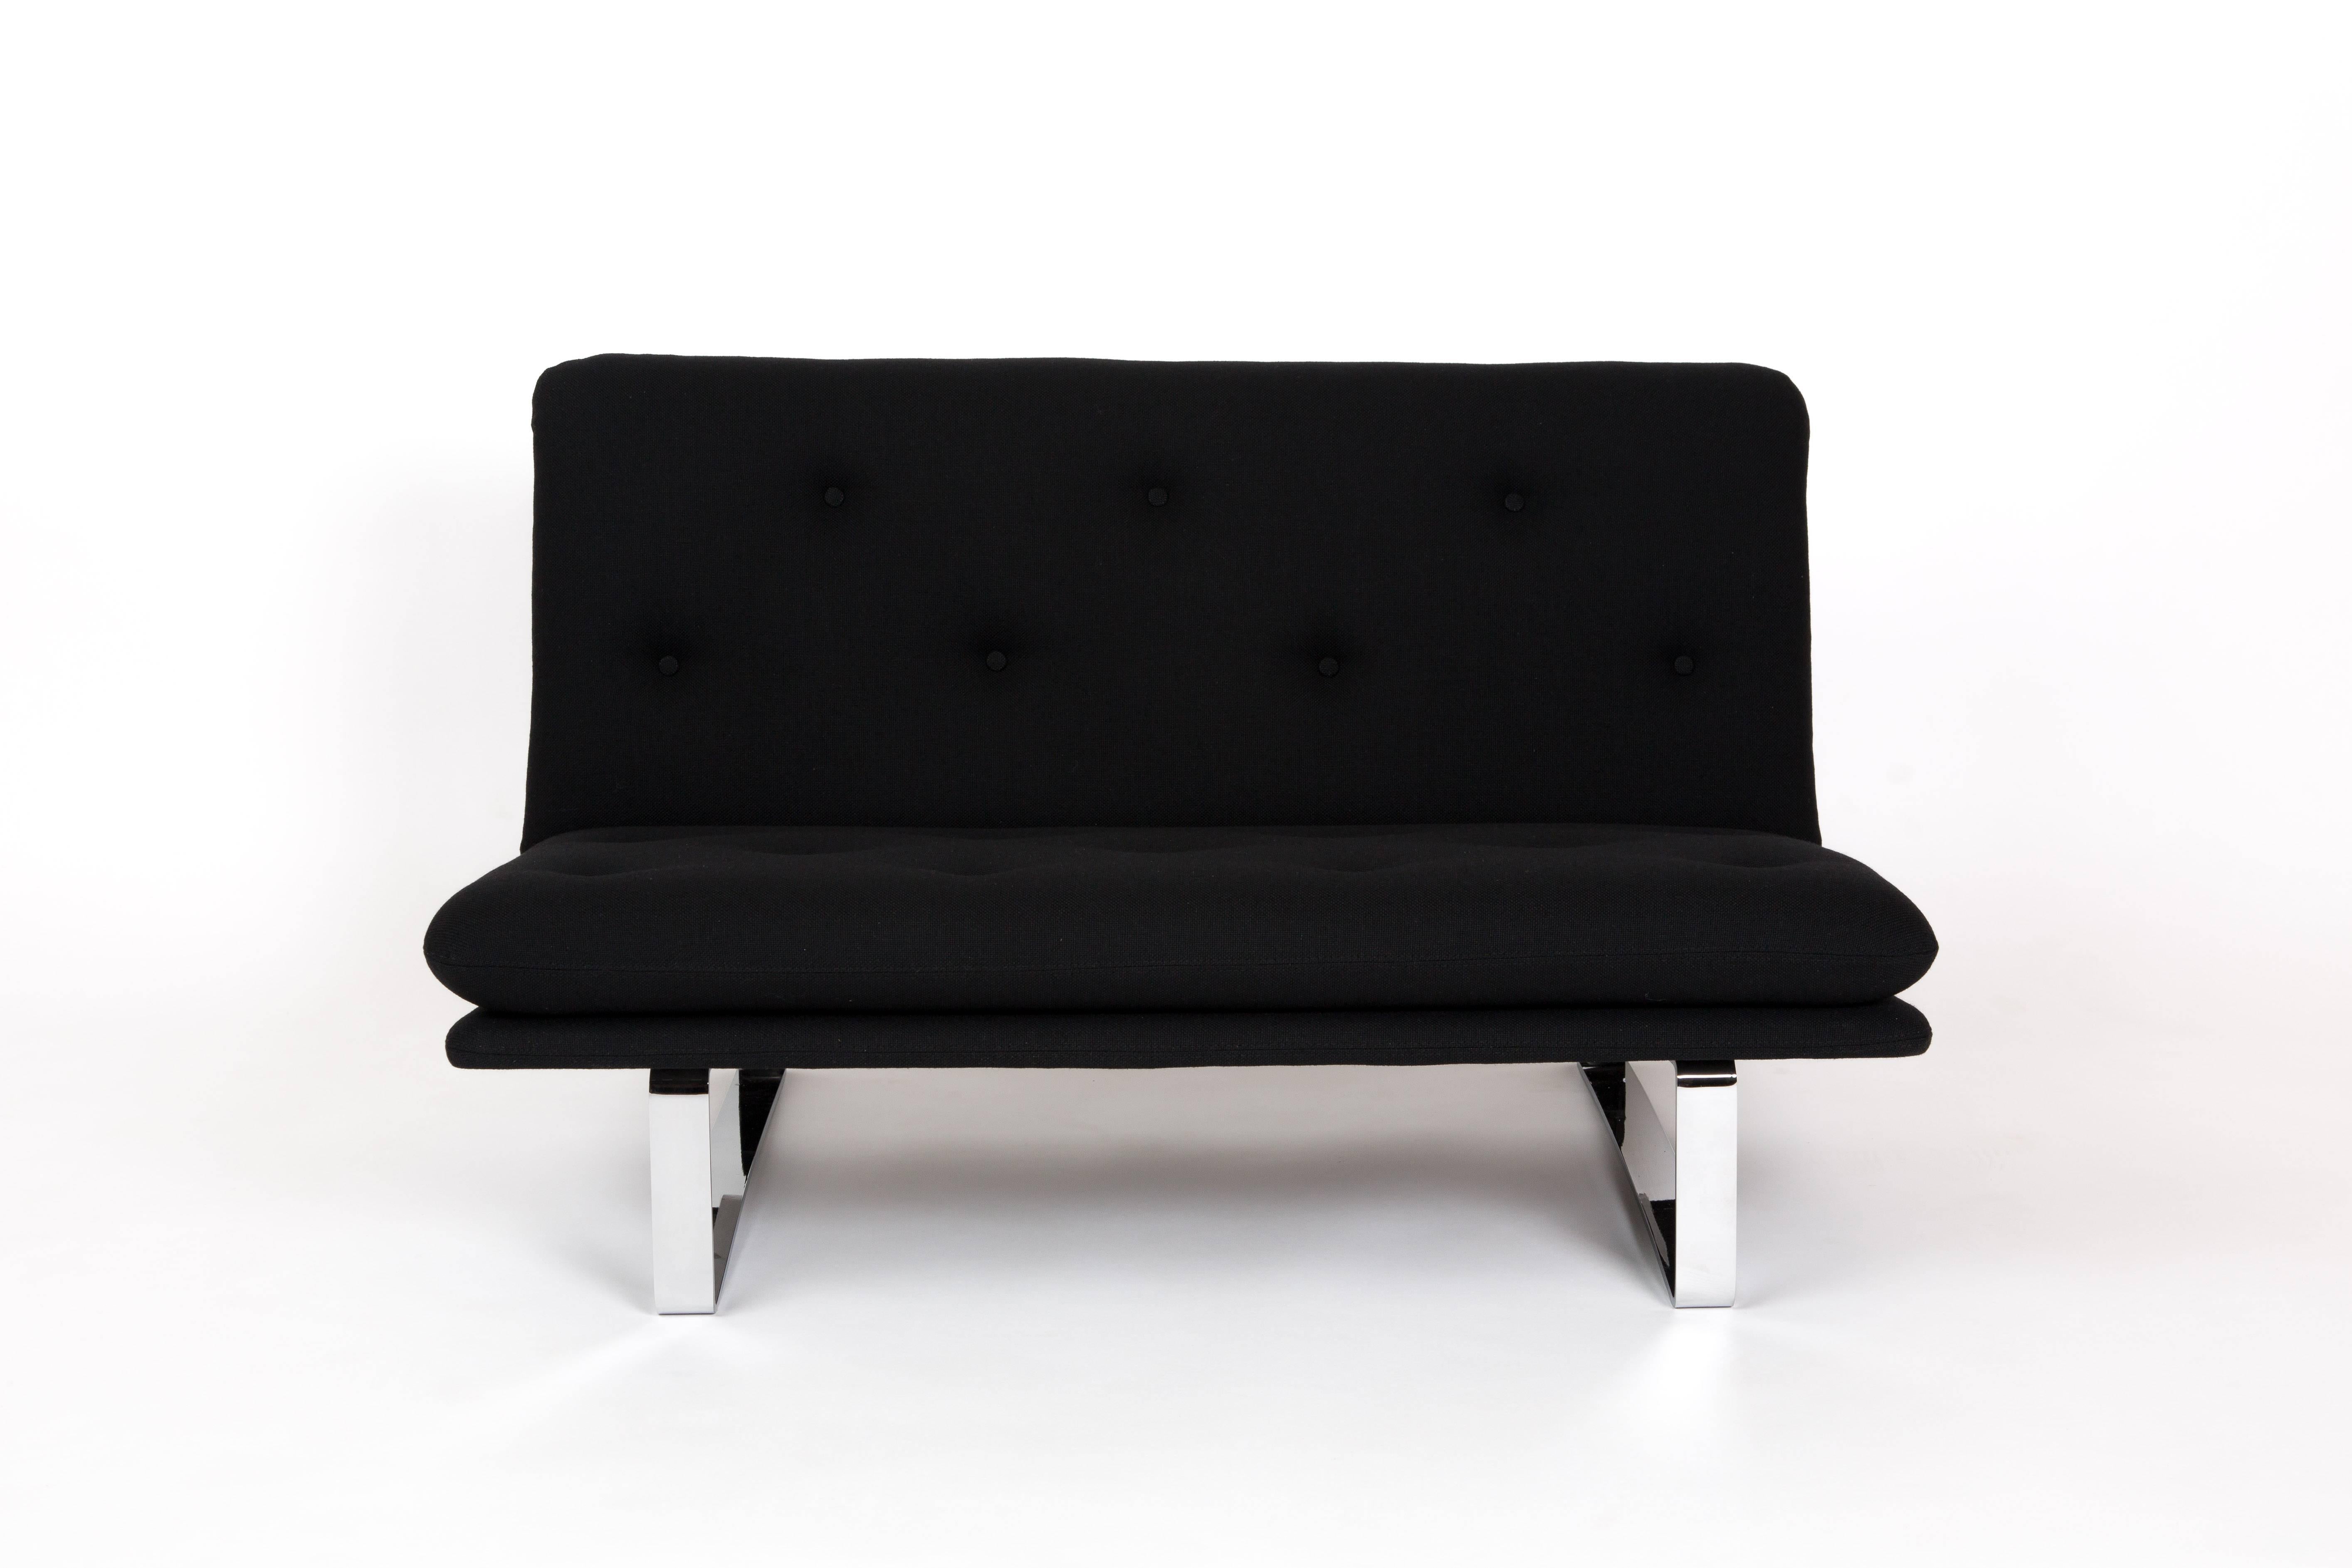 ARTIFORT LOVESEAT. Dutch sofa, designed by Kho Liang Ie for Artifort. This small love-seat is a two sitter. Not in productionn yet. Reupholstered with a black fabric. The cushion has been padded with black buttons. The legs are chrome-plated.

The